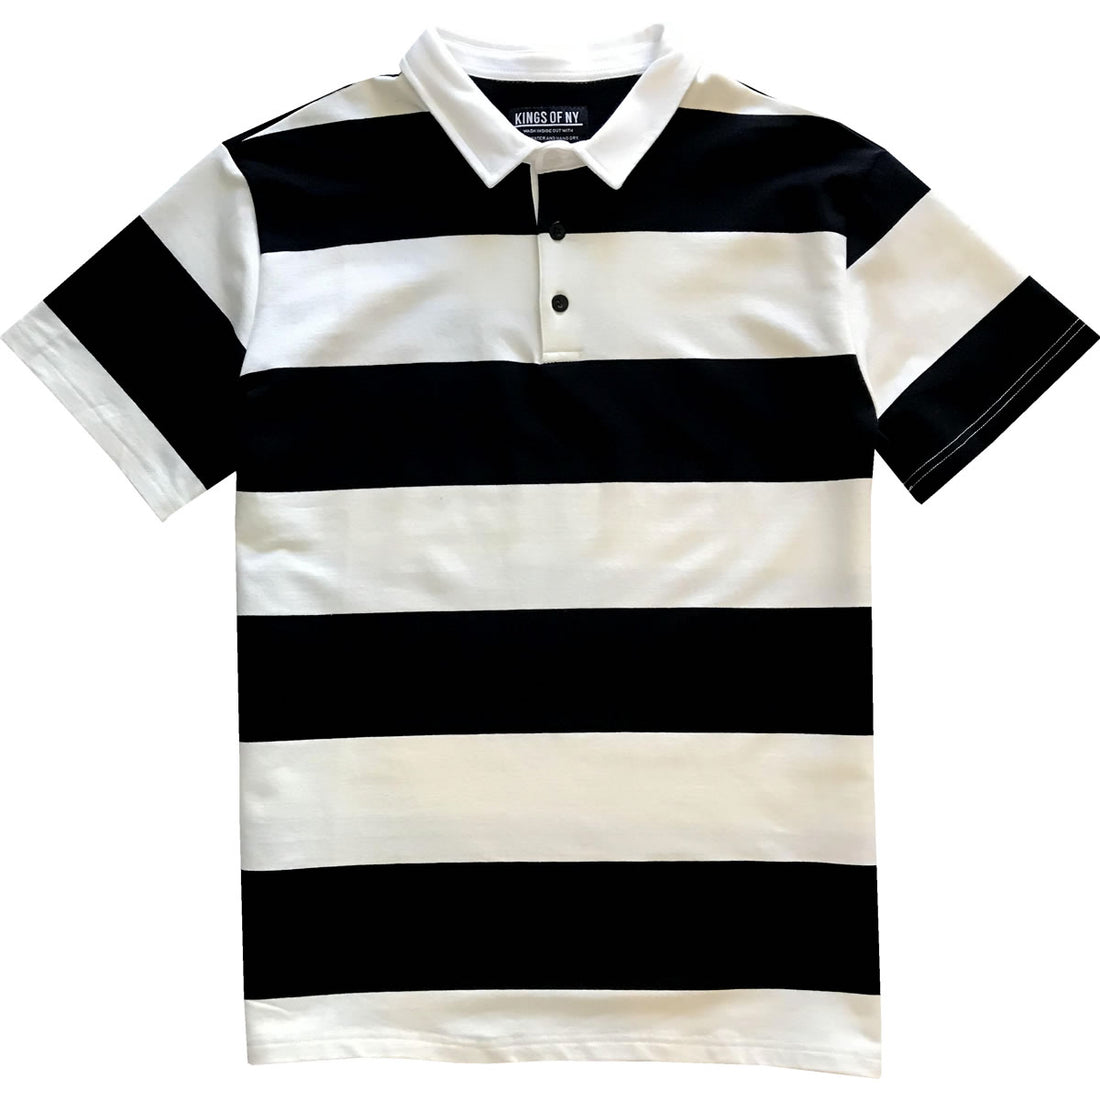 Black and White Short Sleeve Striped Men's Rugby Shirt – KINGS OF NY